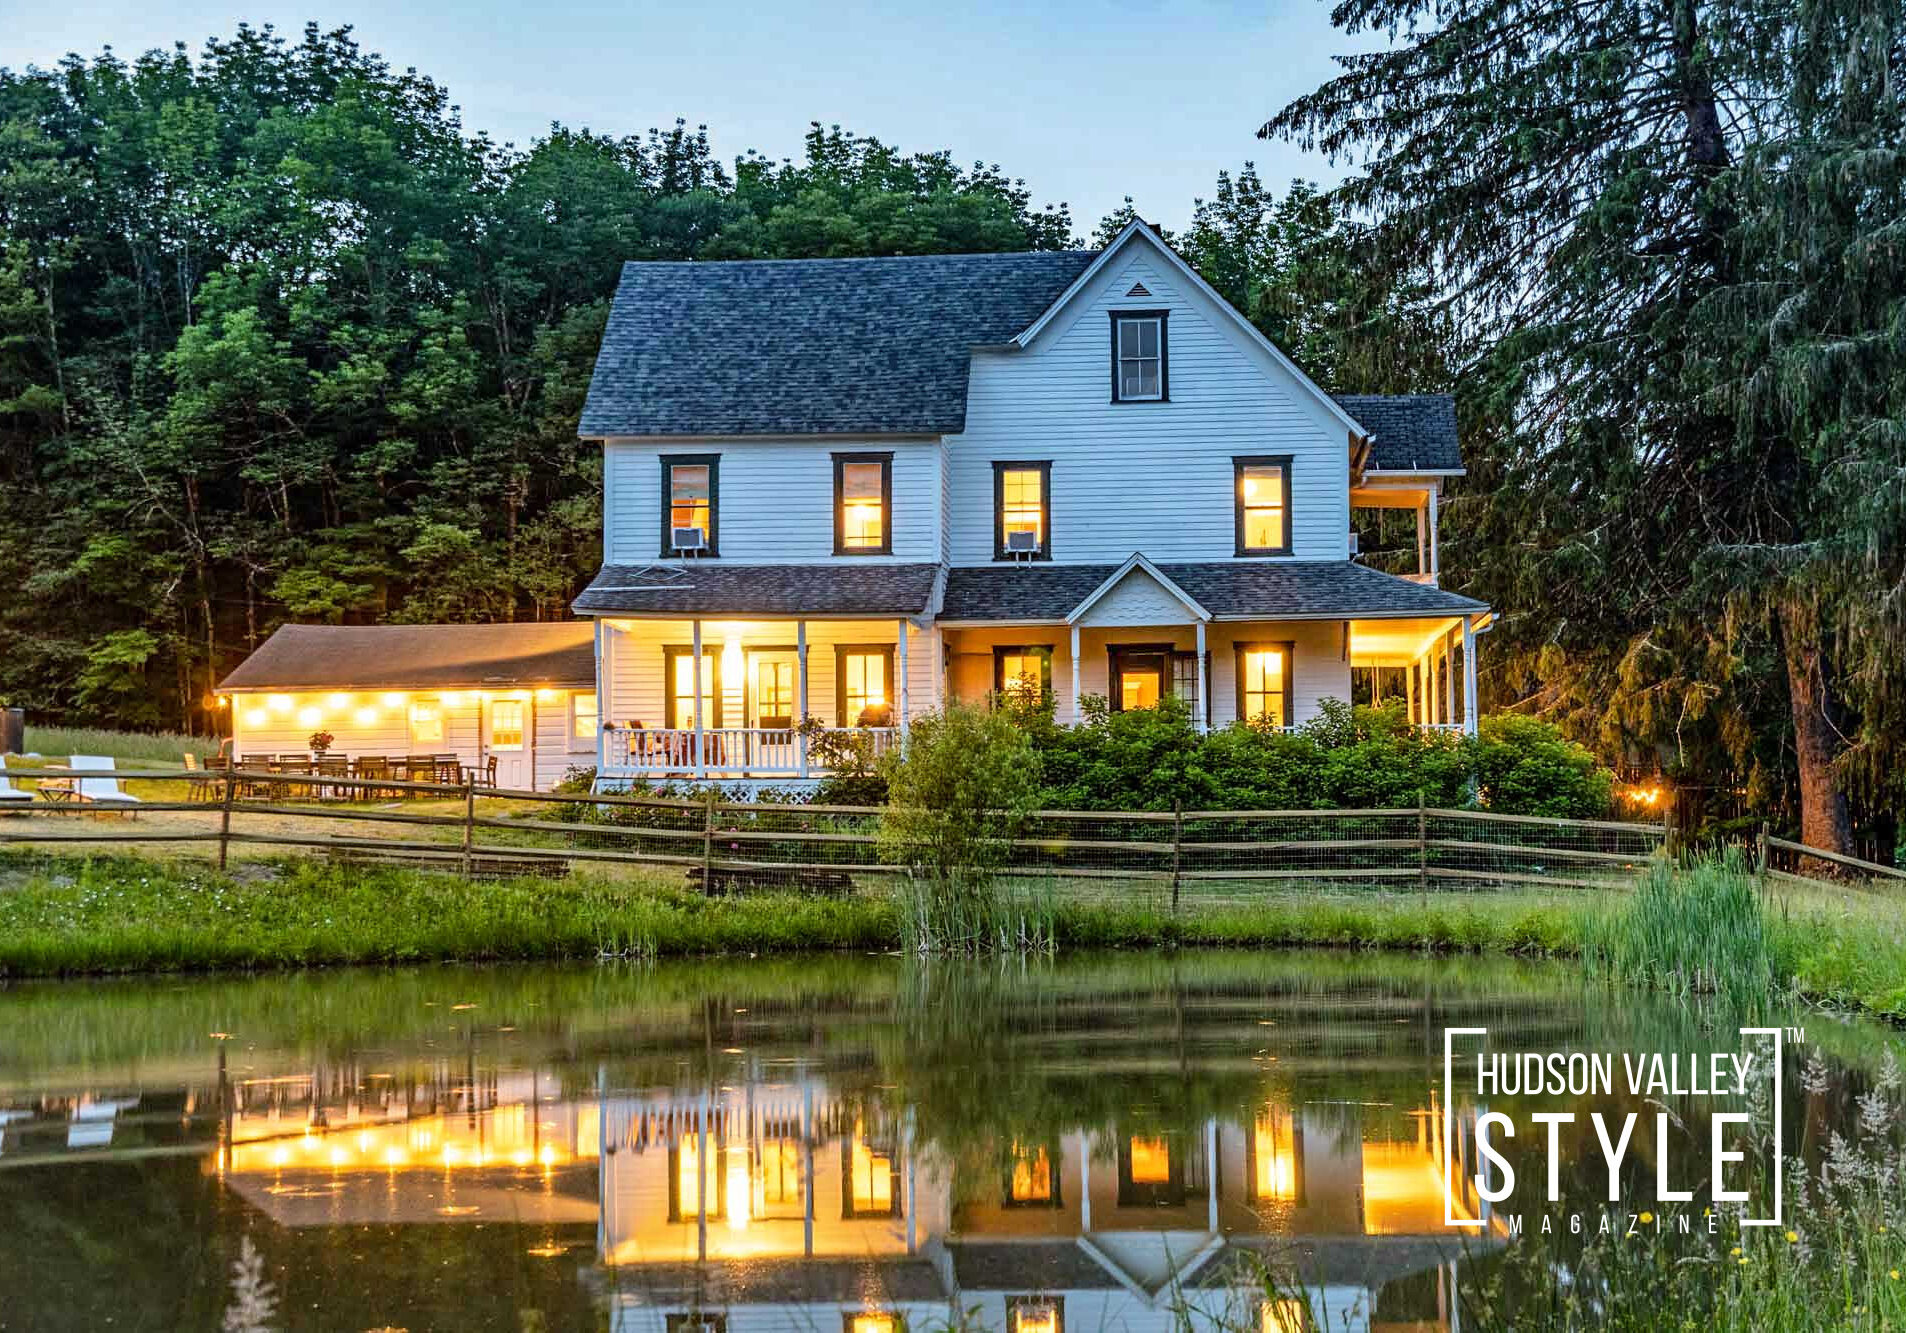 Upstate New York: A Guide to Finding Your Modern Rustic Farmhouse – Presented by Alluvion Real Estate – Best Realtors in Hudson Valley and Catskills